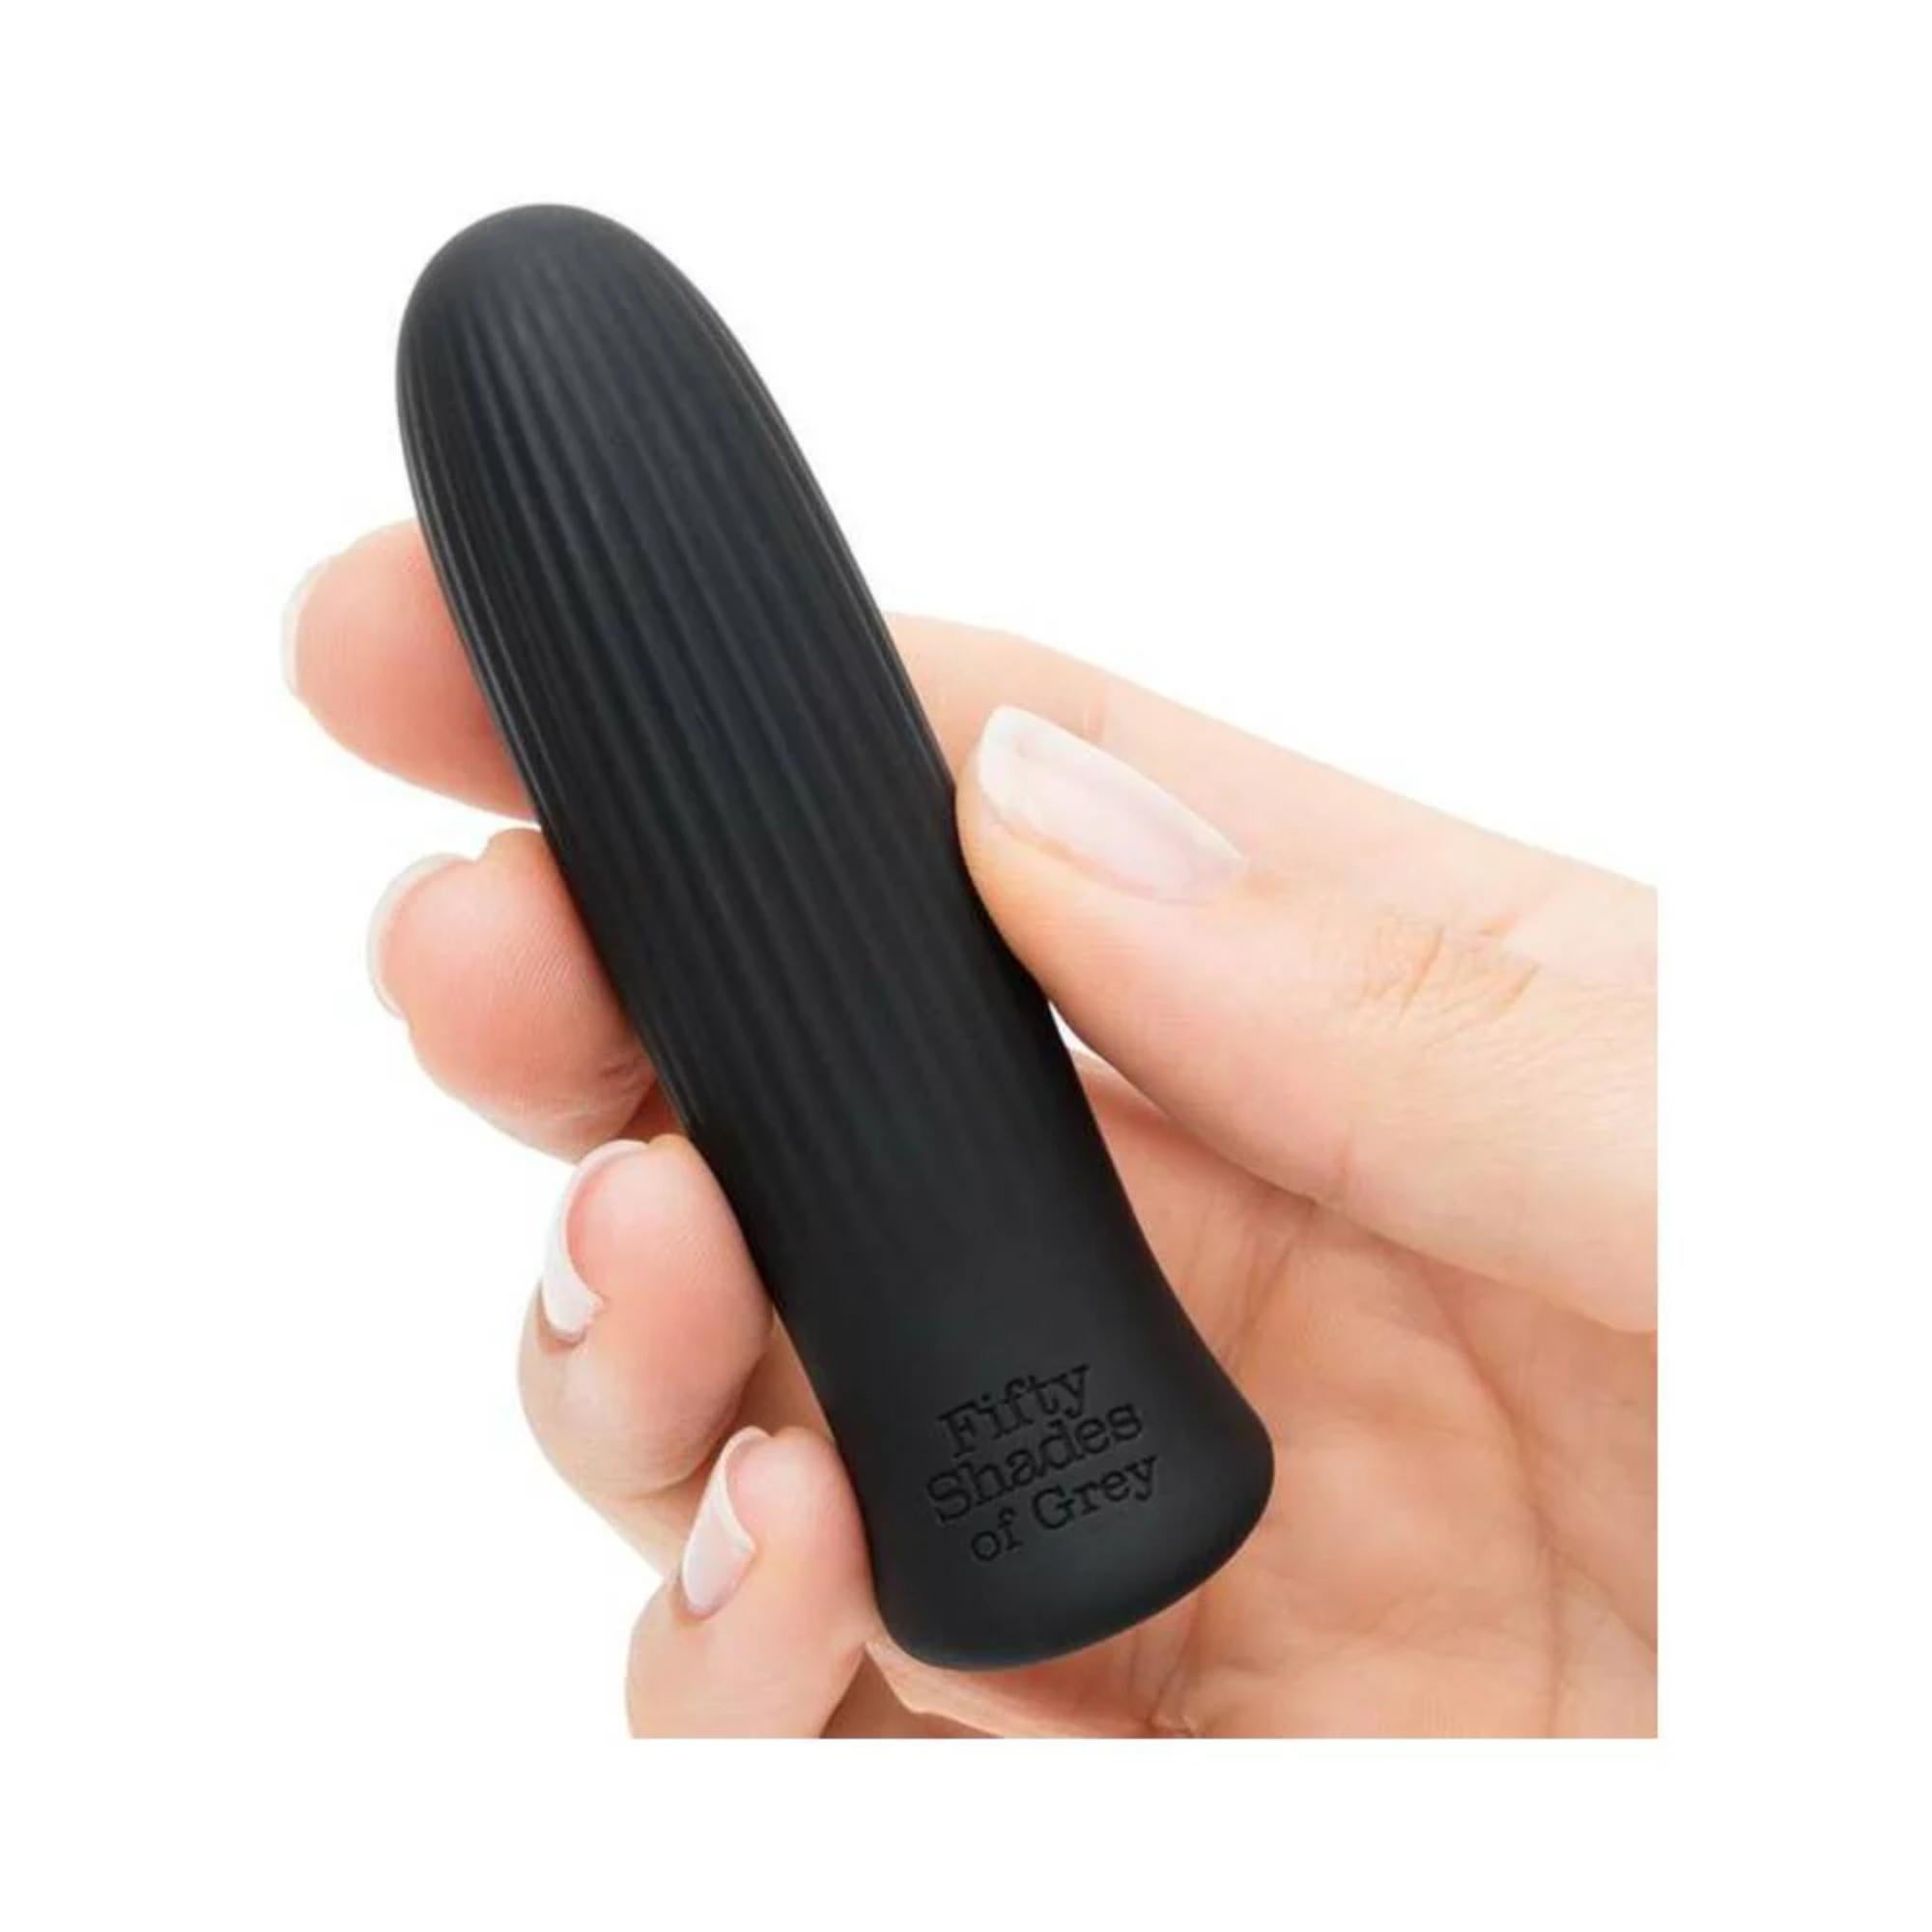 Fifty Shades of Grey Sensation Rechargeable Silicone Bullet Vibrator